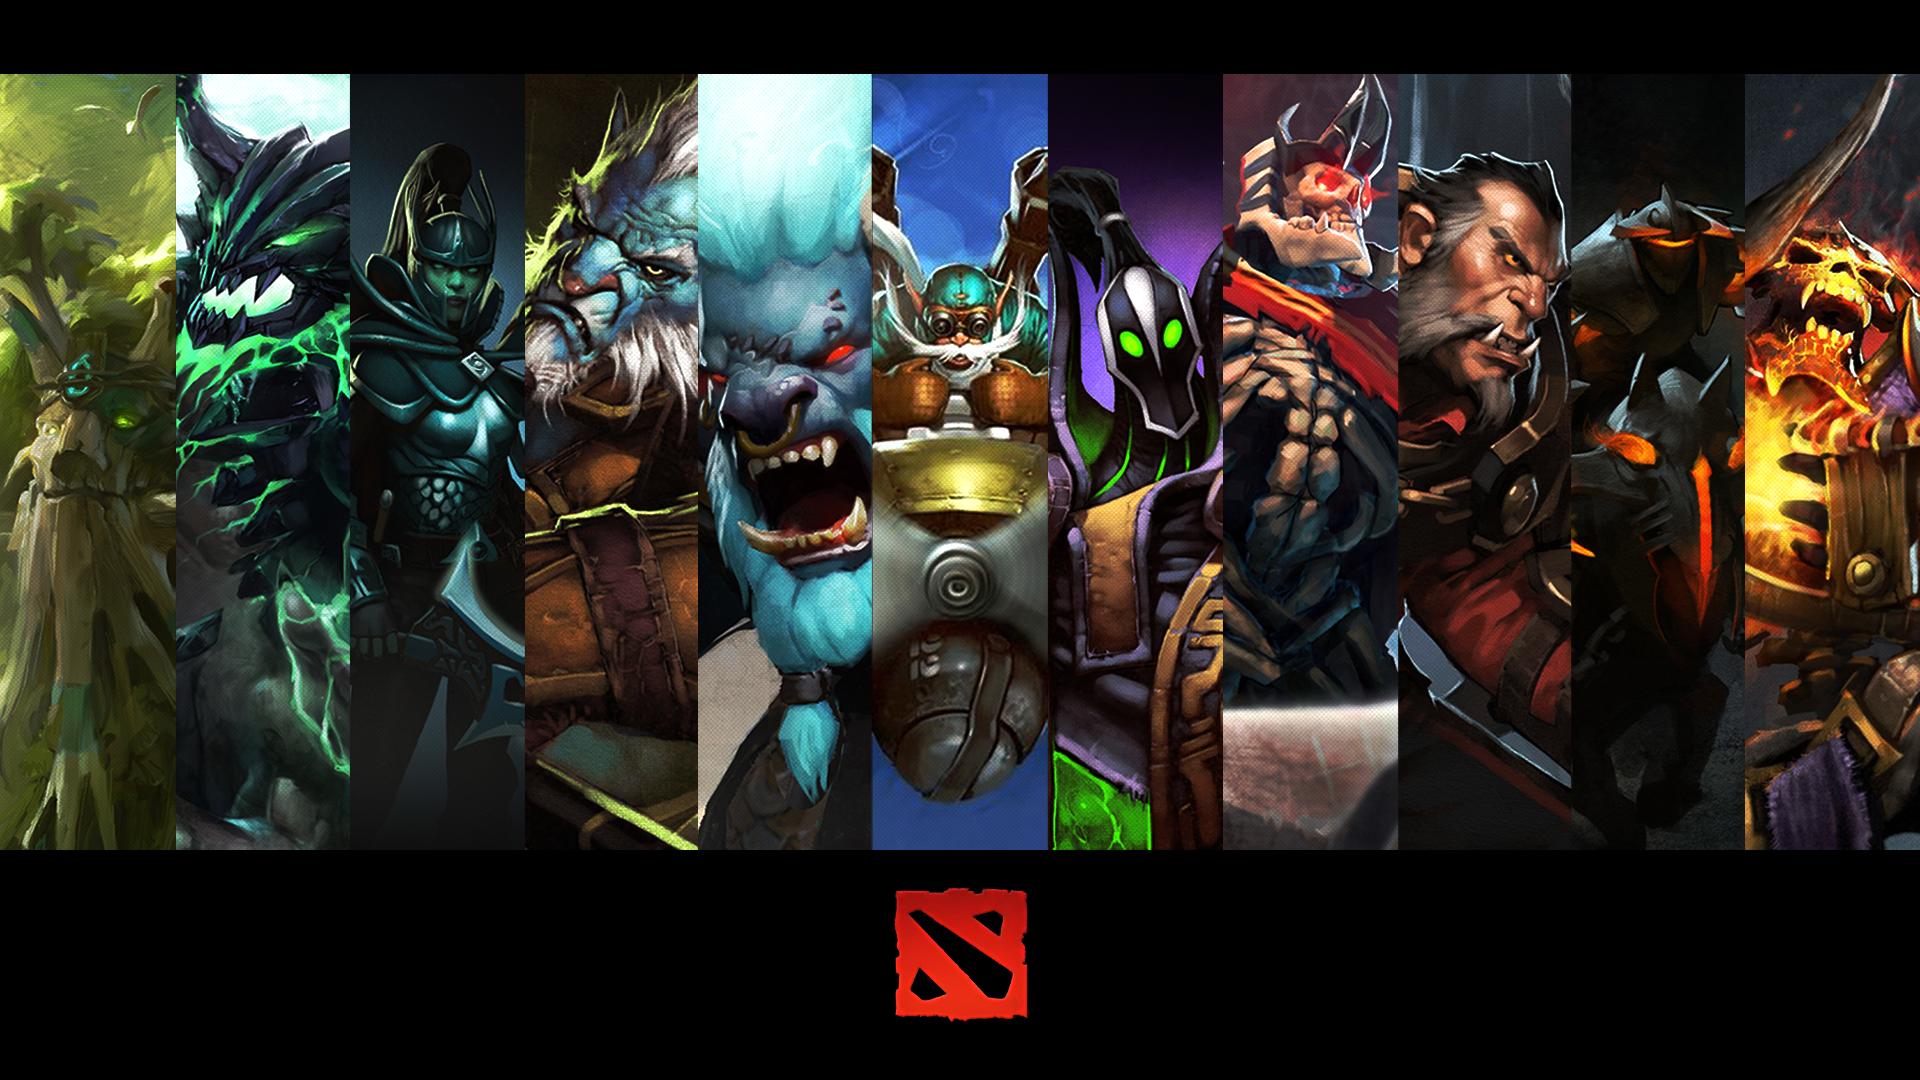 Free Download 11 Heroes Dota 2 Wallpapers Free Download Wallpaper Hd [1920x1080] For Your